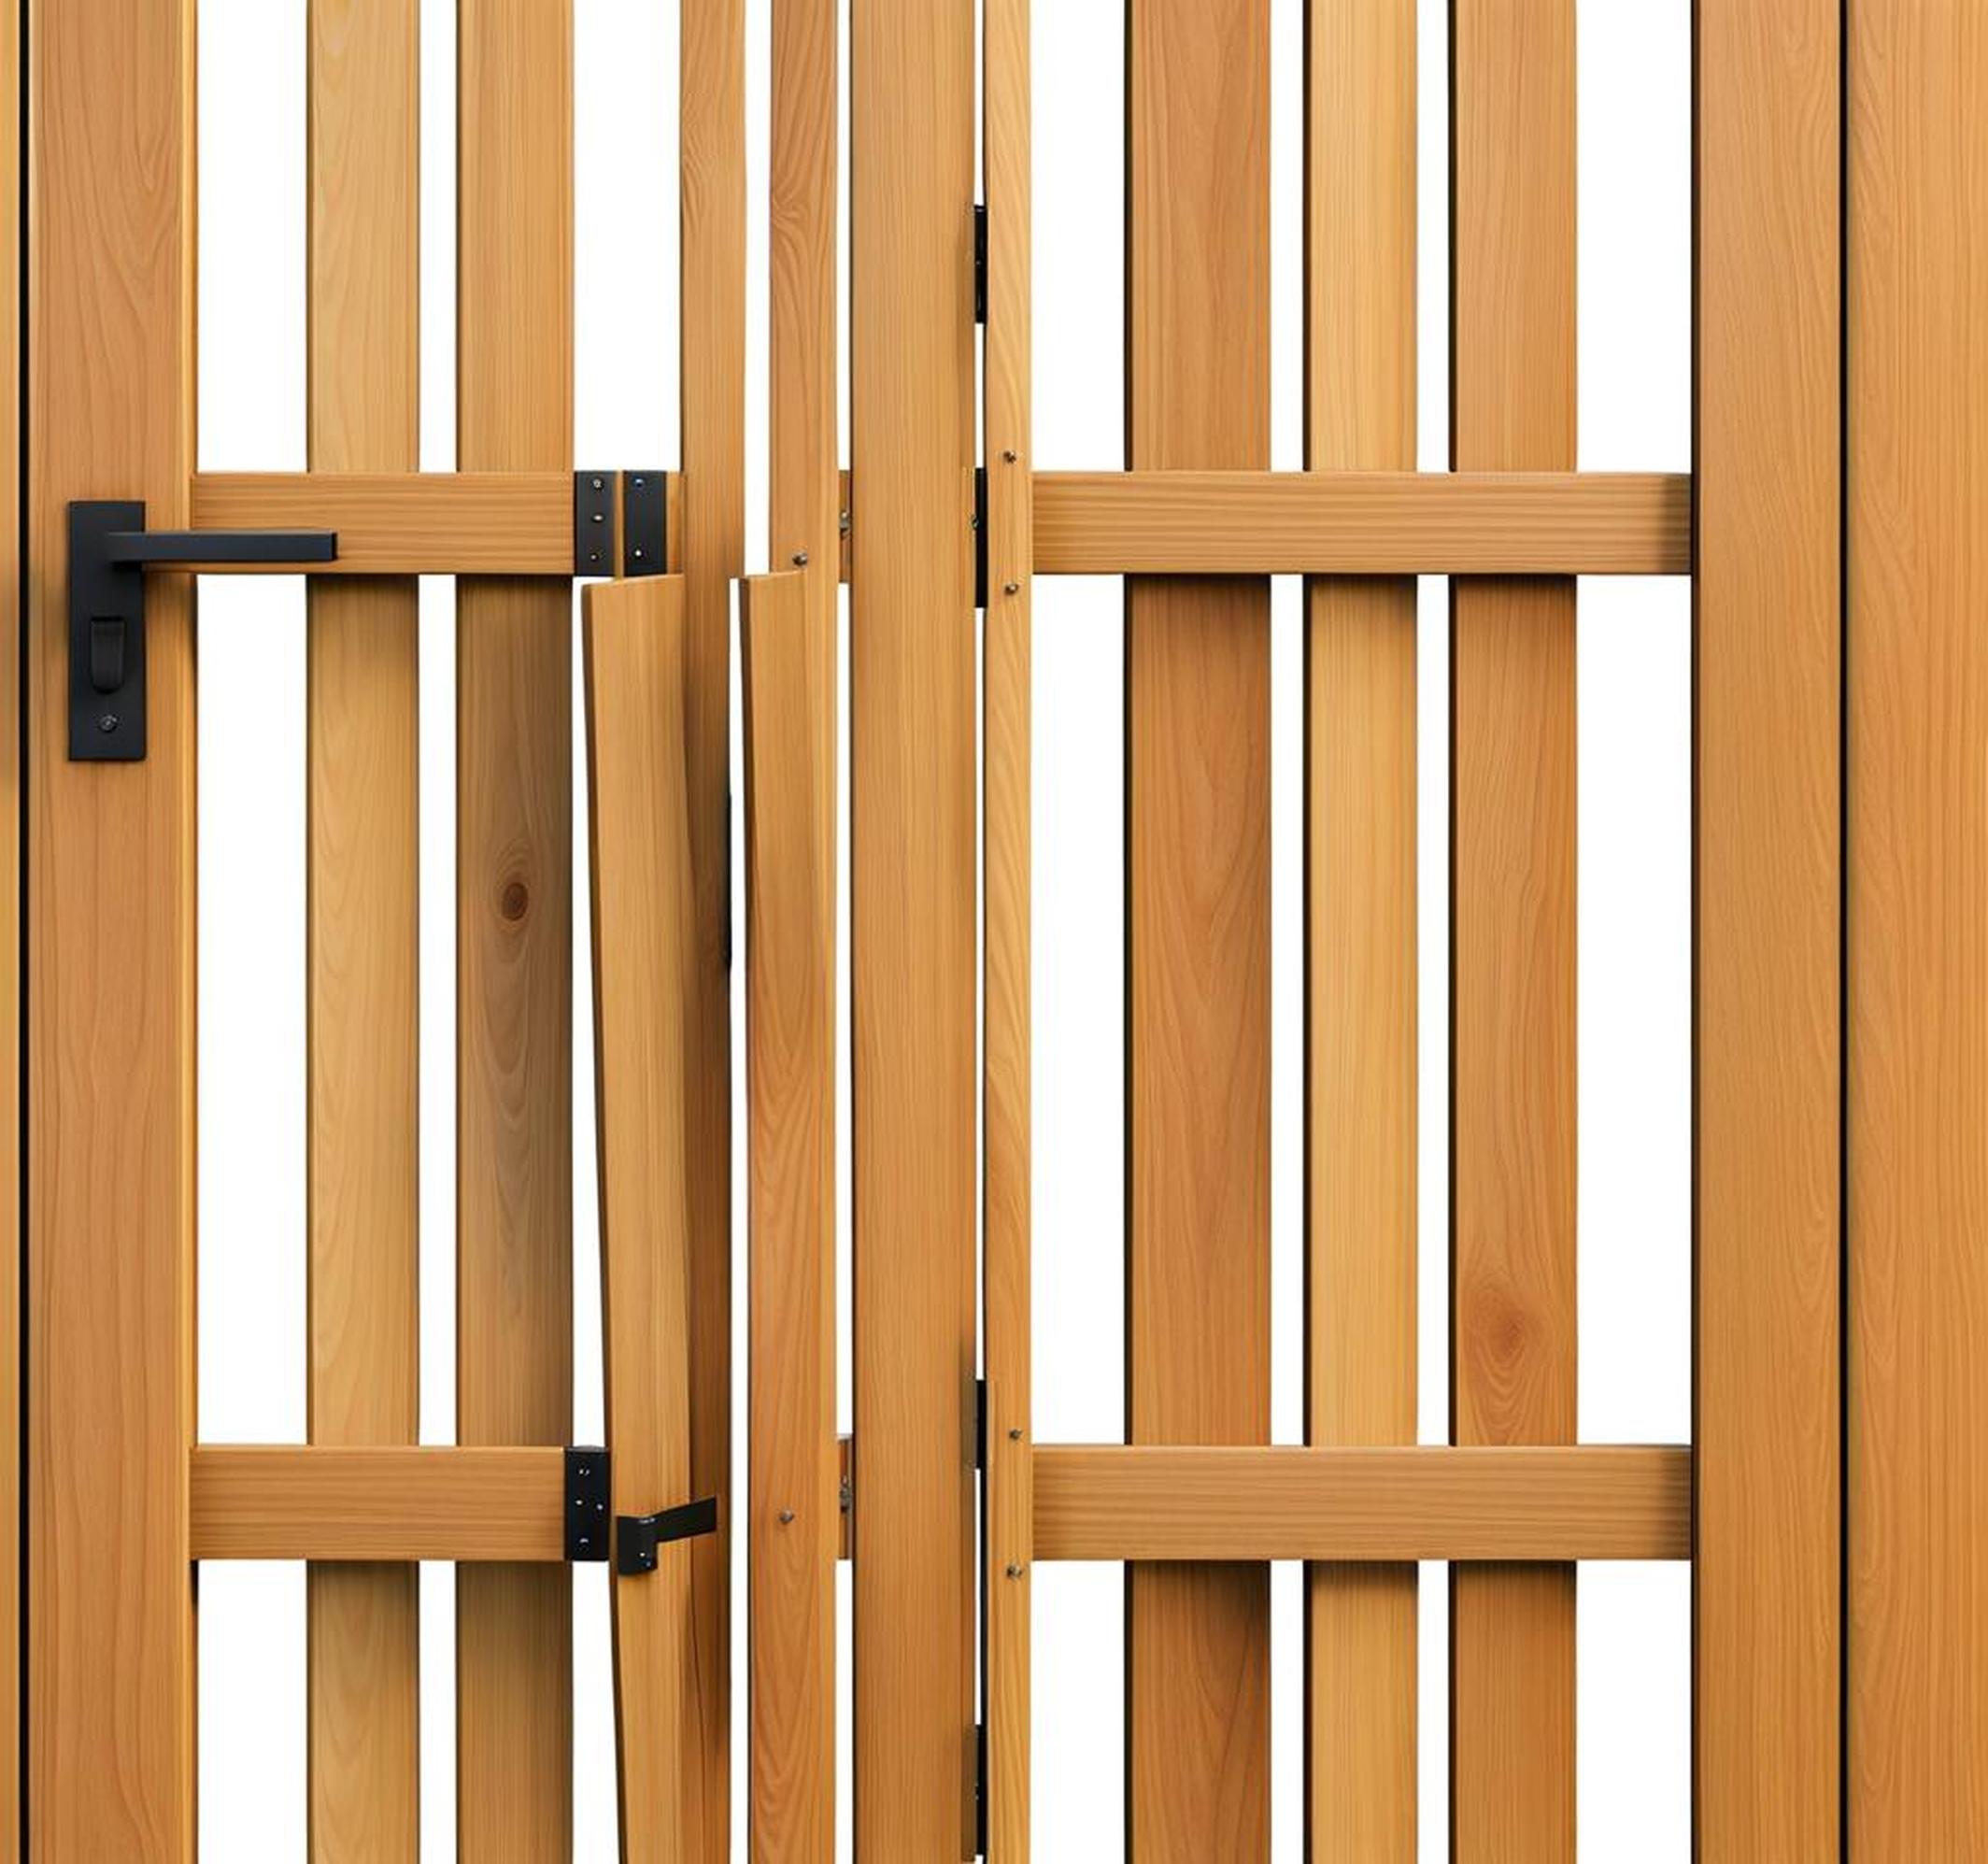 wooden fence gate designs